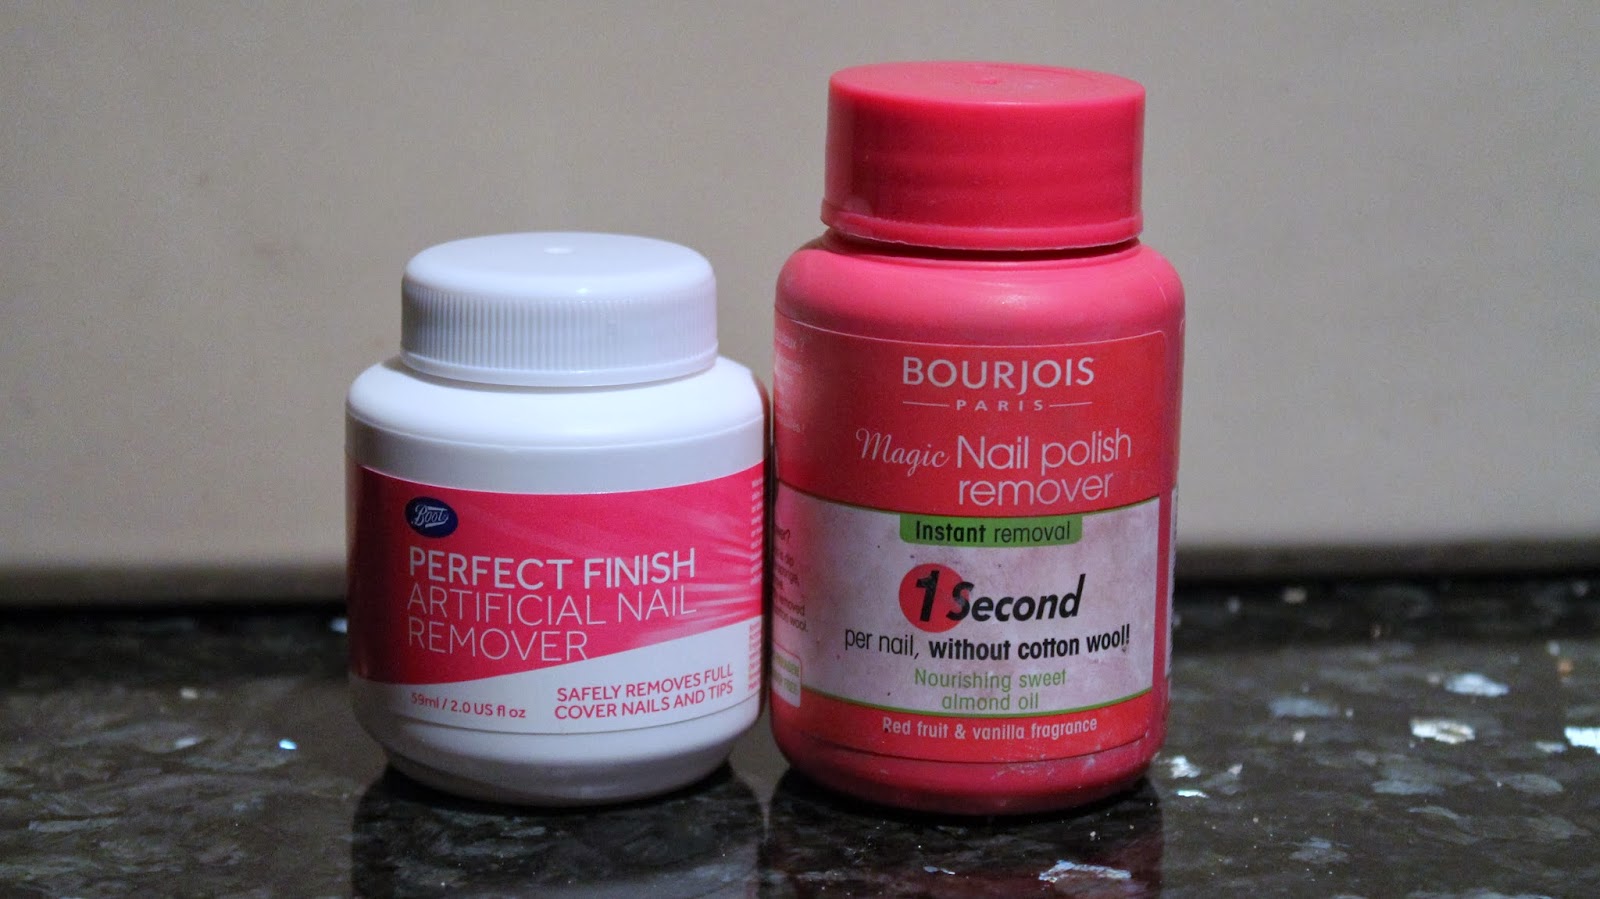 The Comparison Boots V Bourjois Nail Polish Remover Topaz May